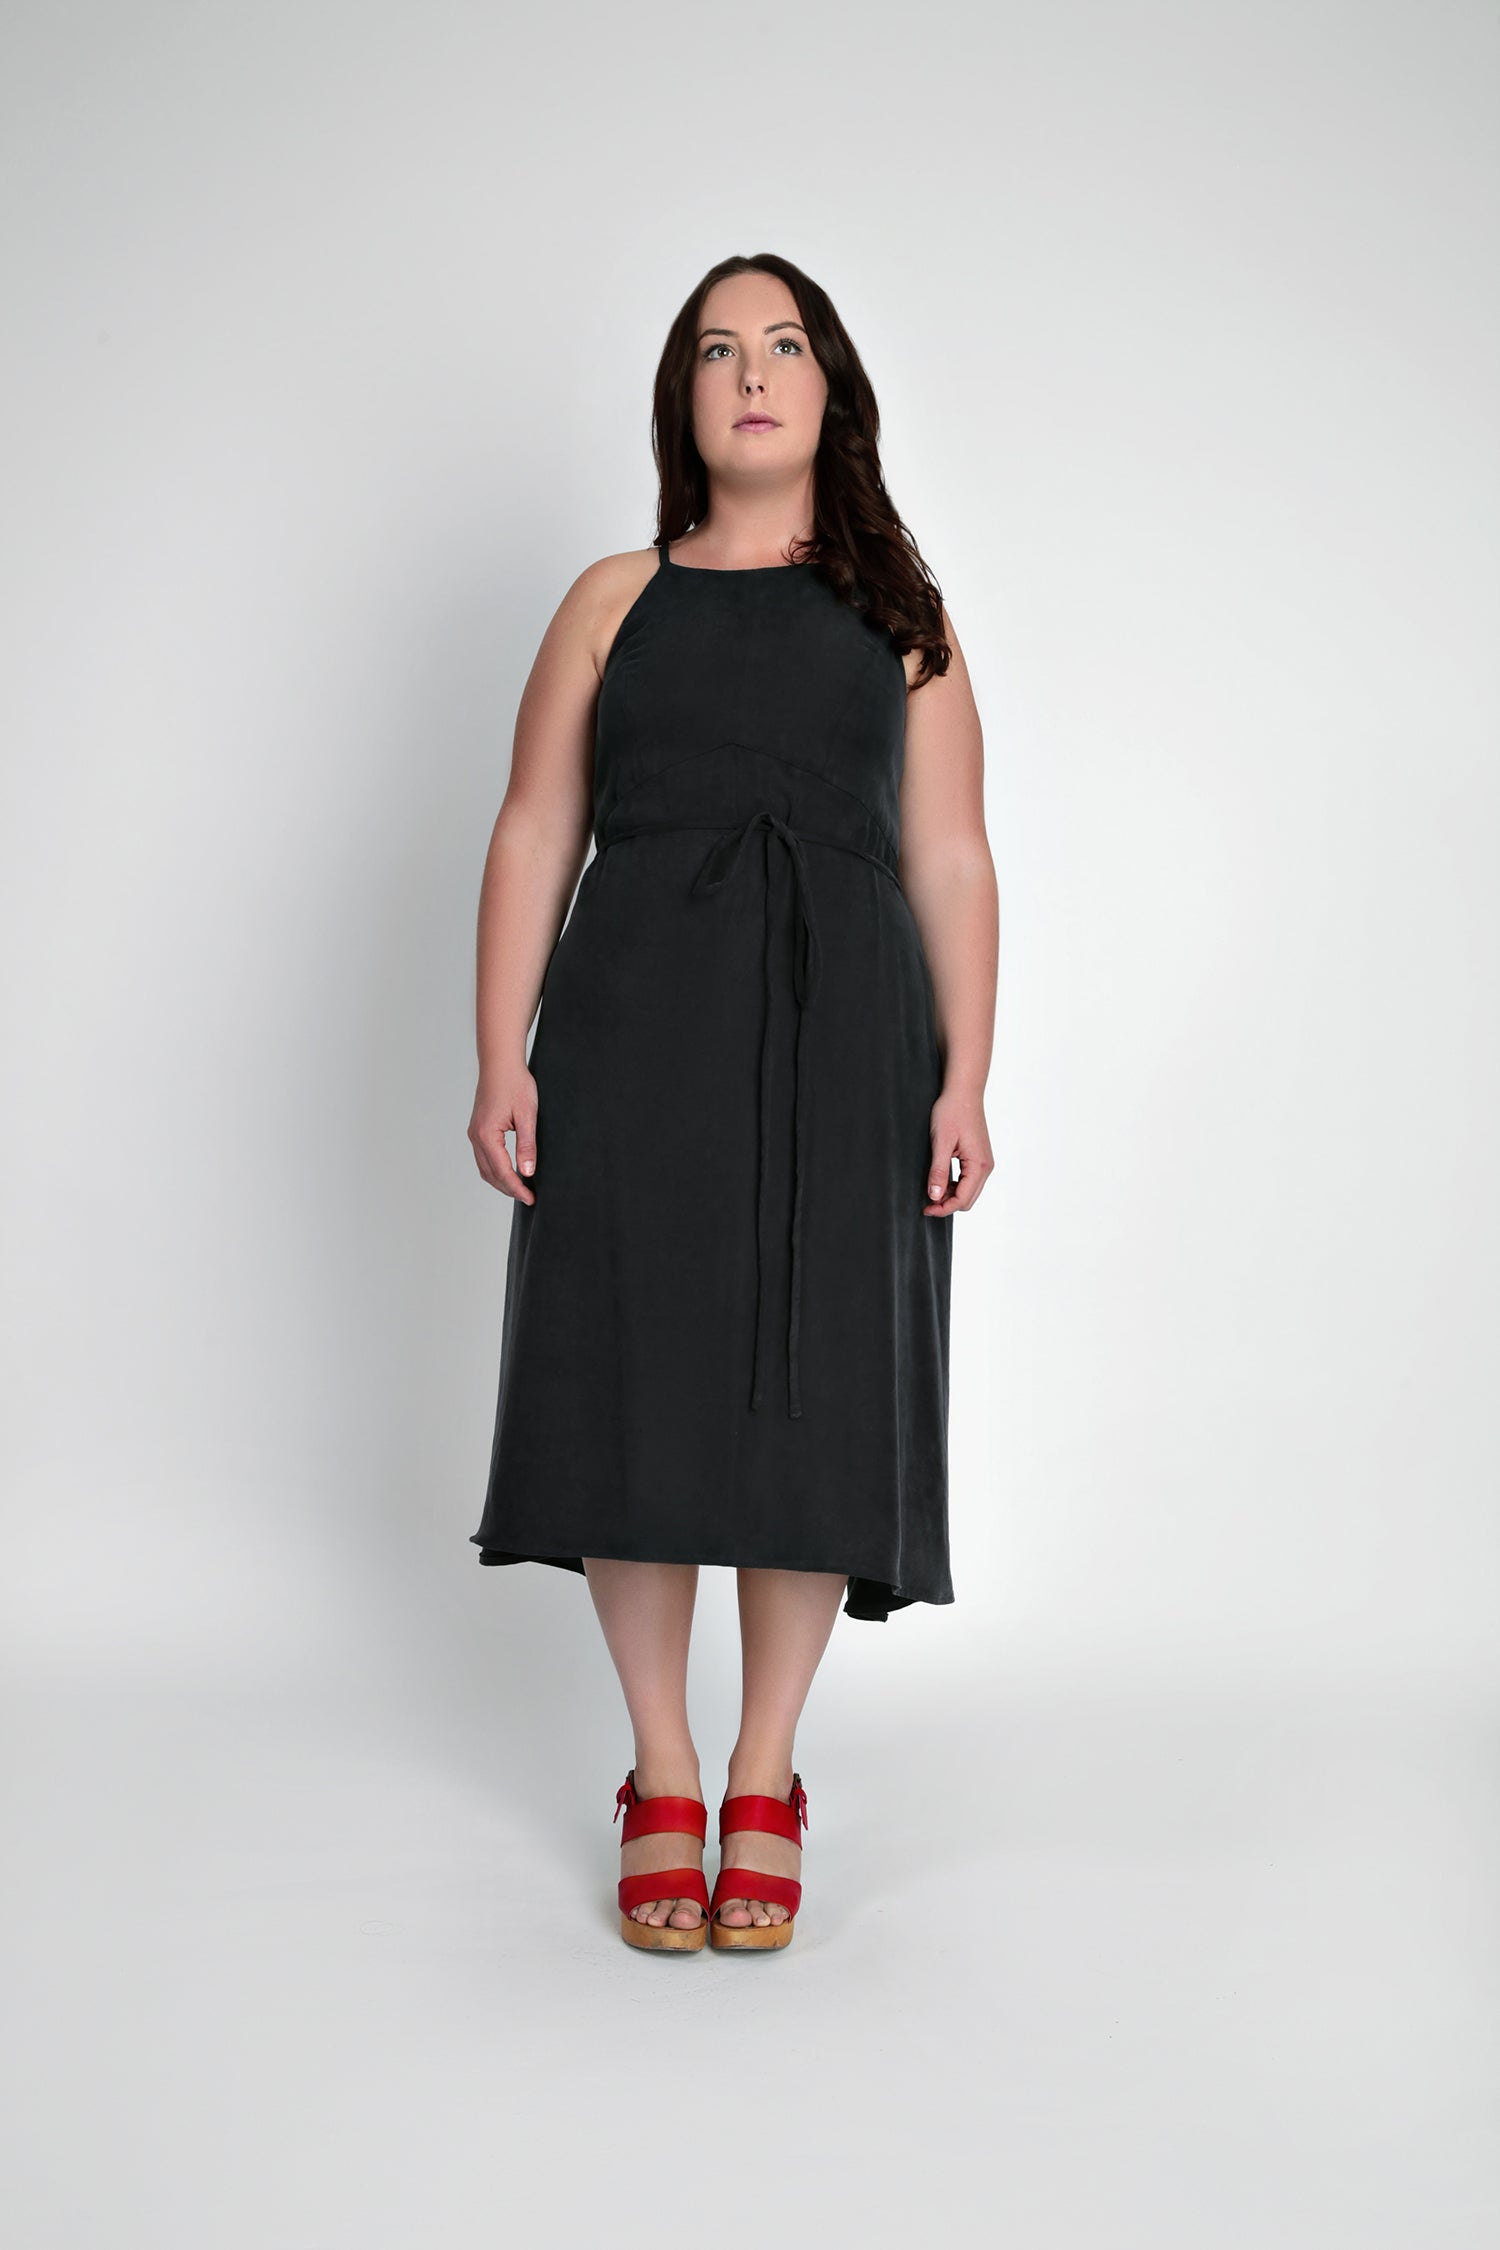 Acton dress pattern – In the Folds